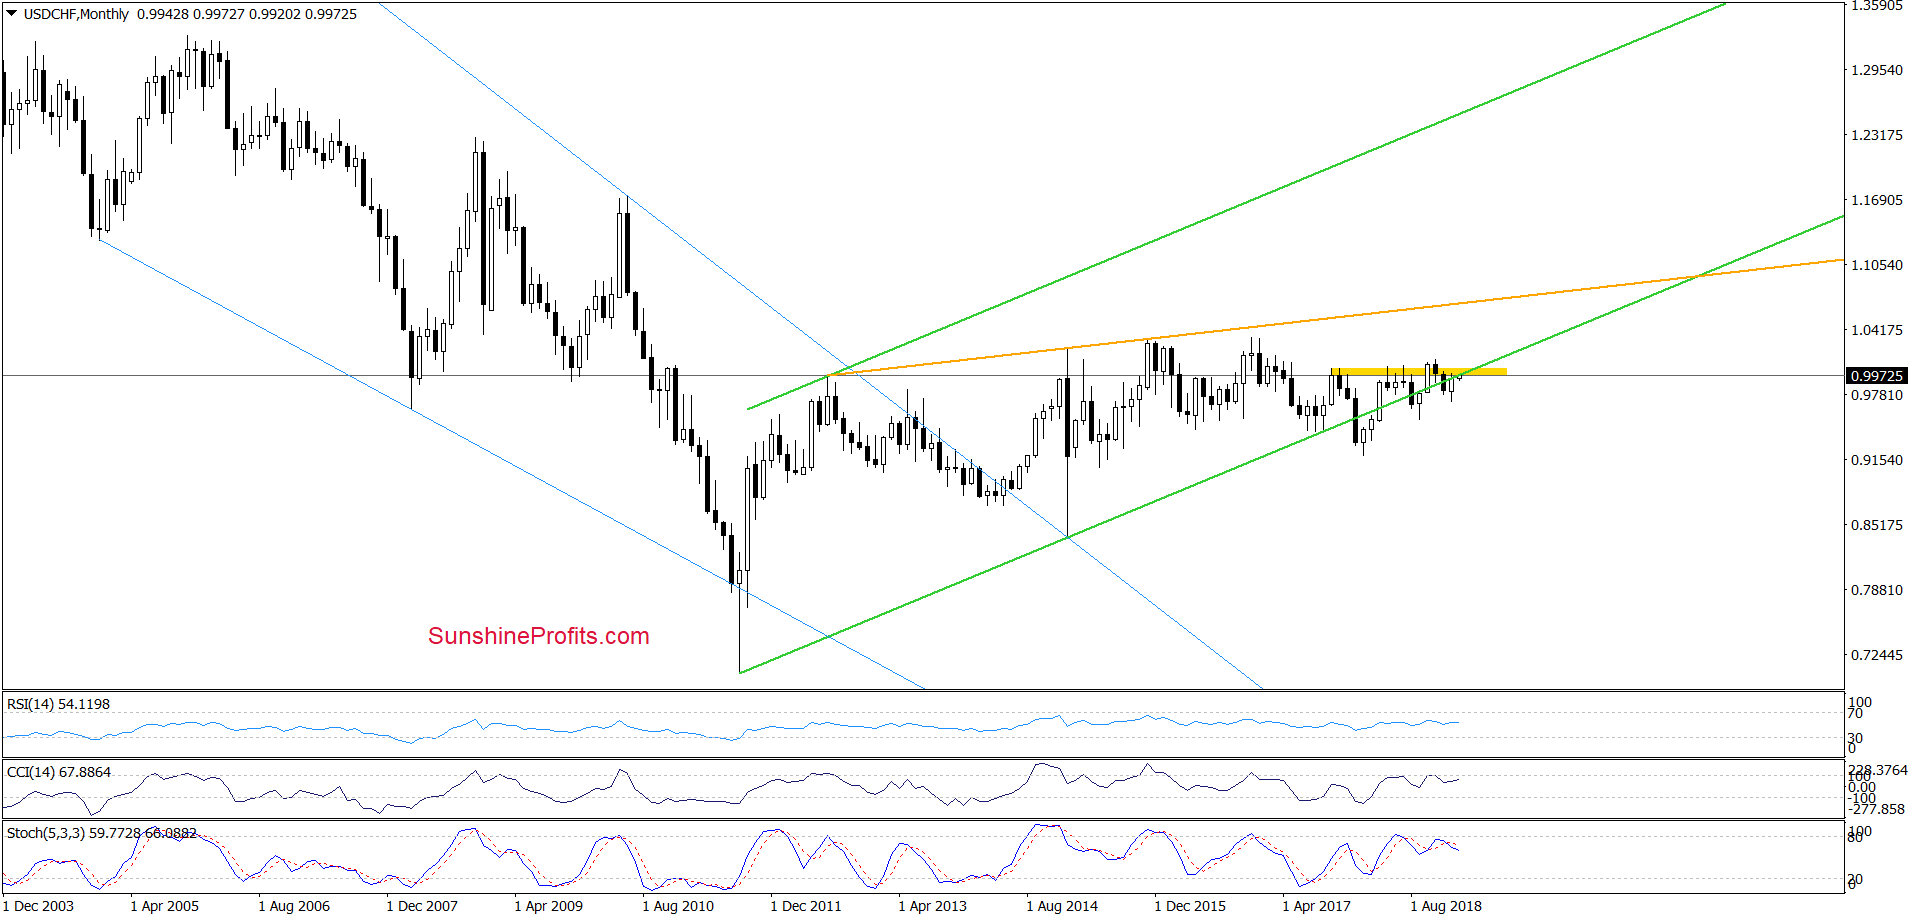 USD/CHF - monthly chart